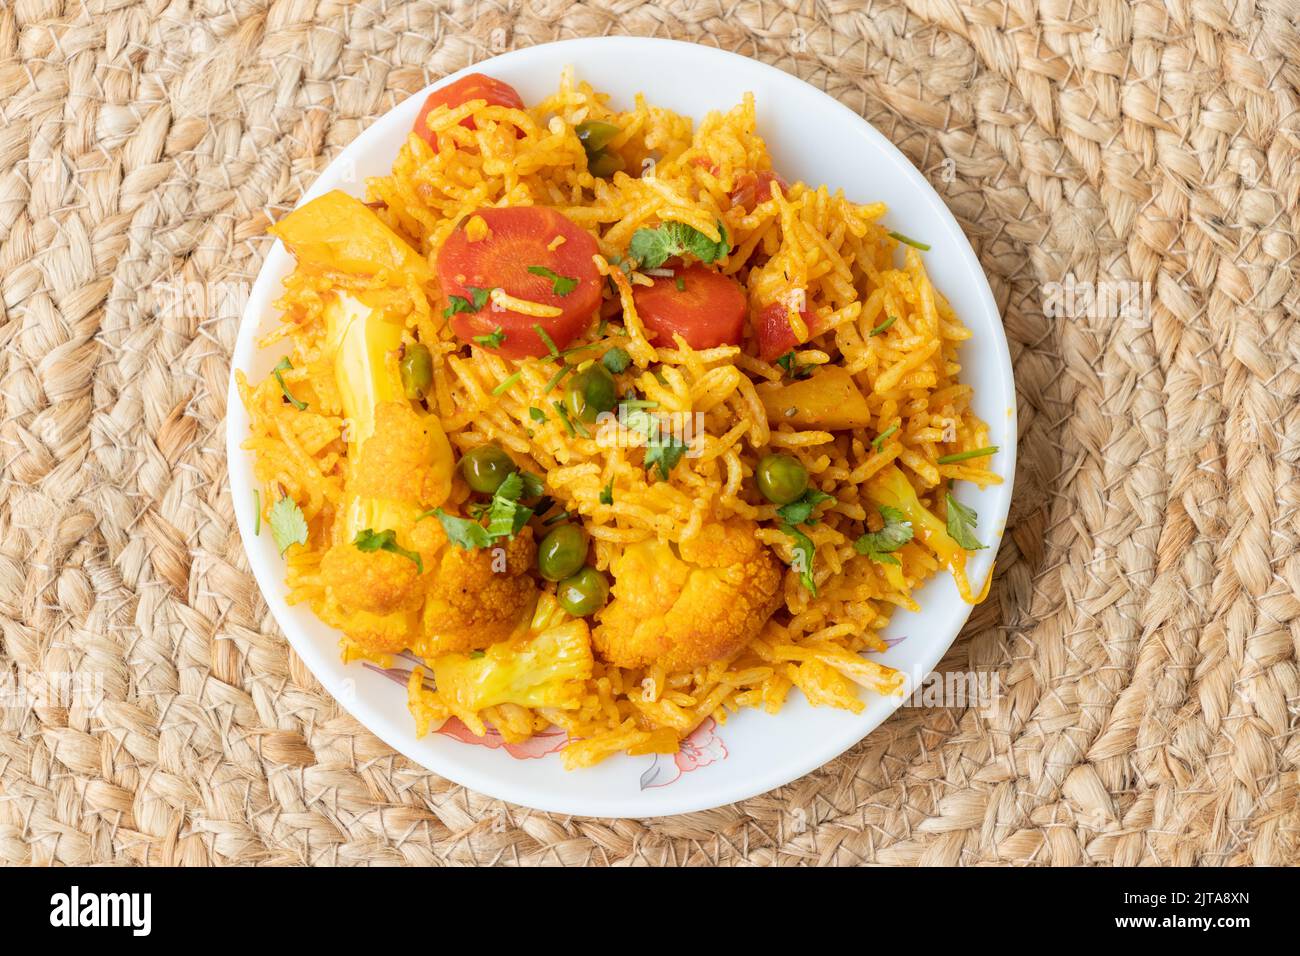 Indian vegetarian fried rice in the plate with carrot, spring onion, green peas, colliflower Stock Photo